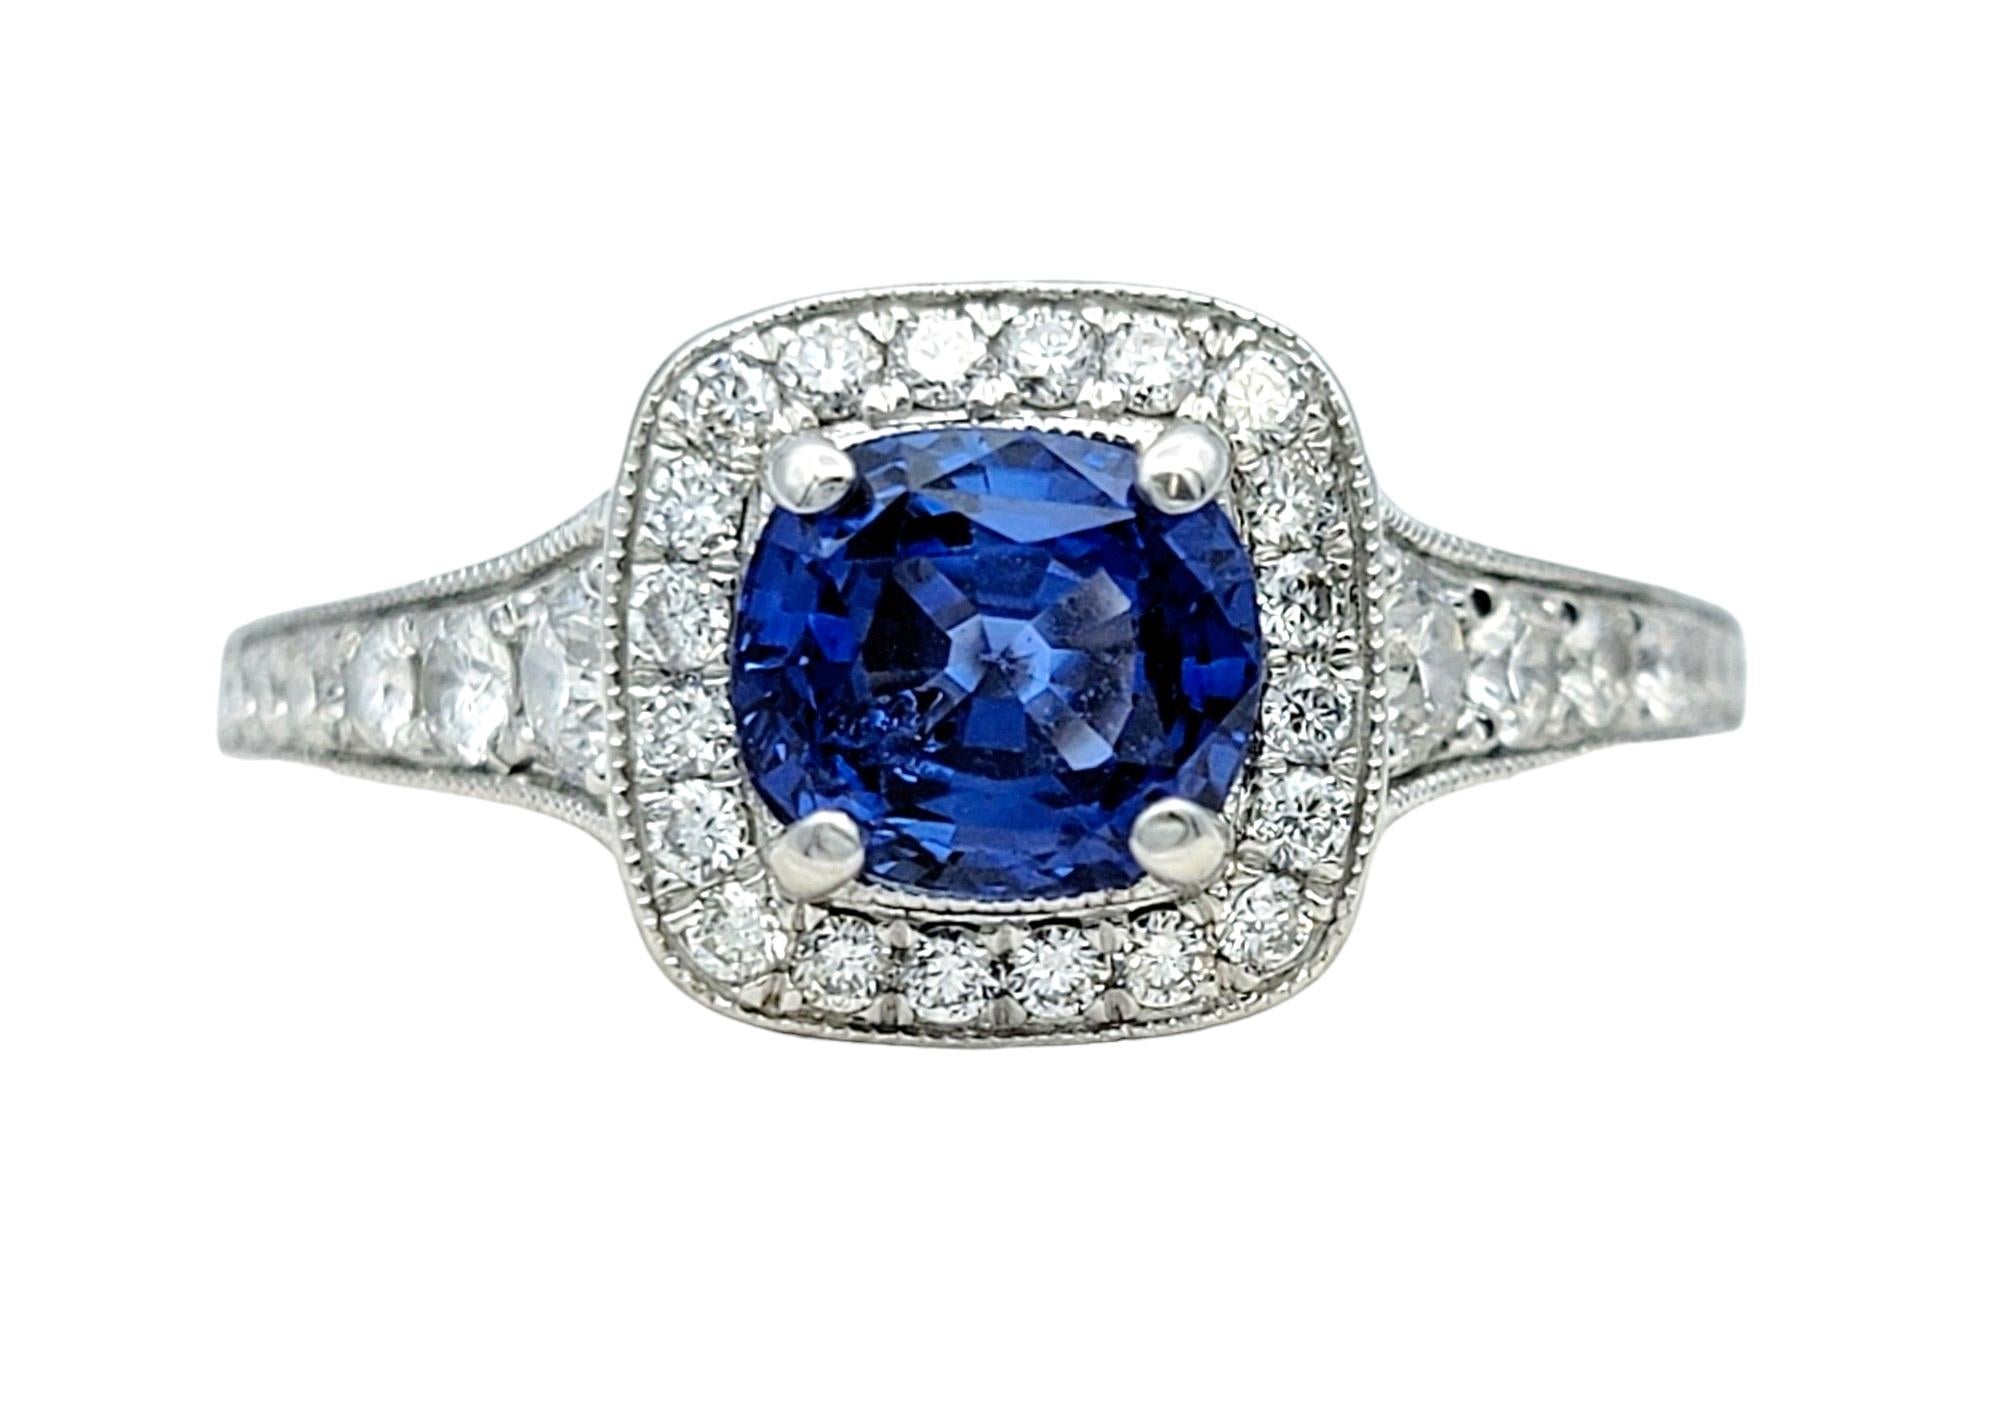 Ring Size: 9

This stunning blue sapphire with diamond halo cocktail ring, set in radiant 14 karat white gold, is a brilliant statement piece that exudes timeless elegance and sophistication. At its center, a mesmerizing blue sapphire gemstone